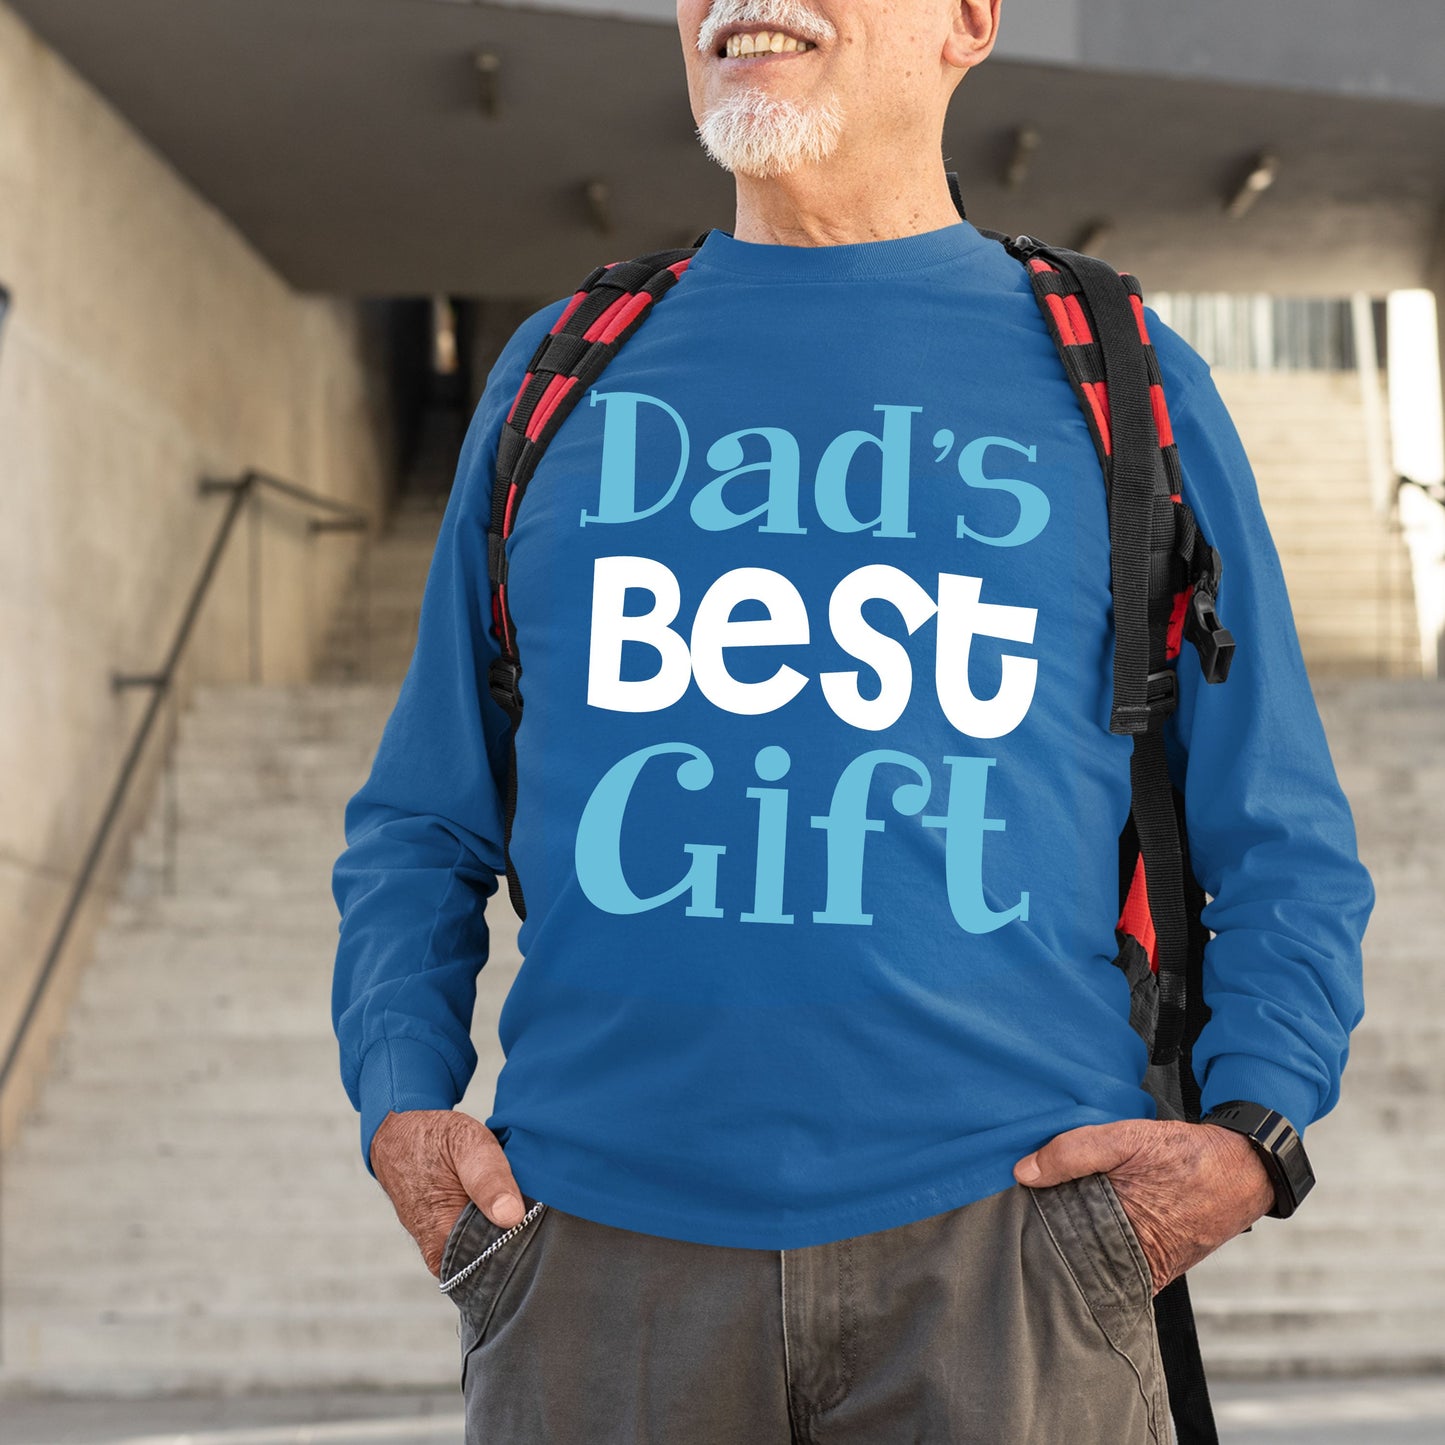 Dad's Best Gift, Men Long Sleeves, Christmas, Christmas Decor, Christmas Shirts, Christmas Sweatshirts, Christmas Clothing